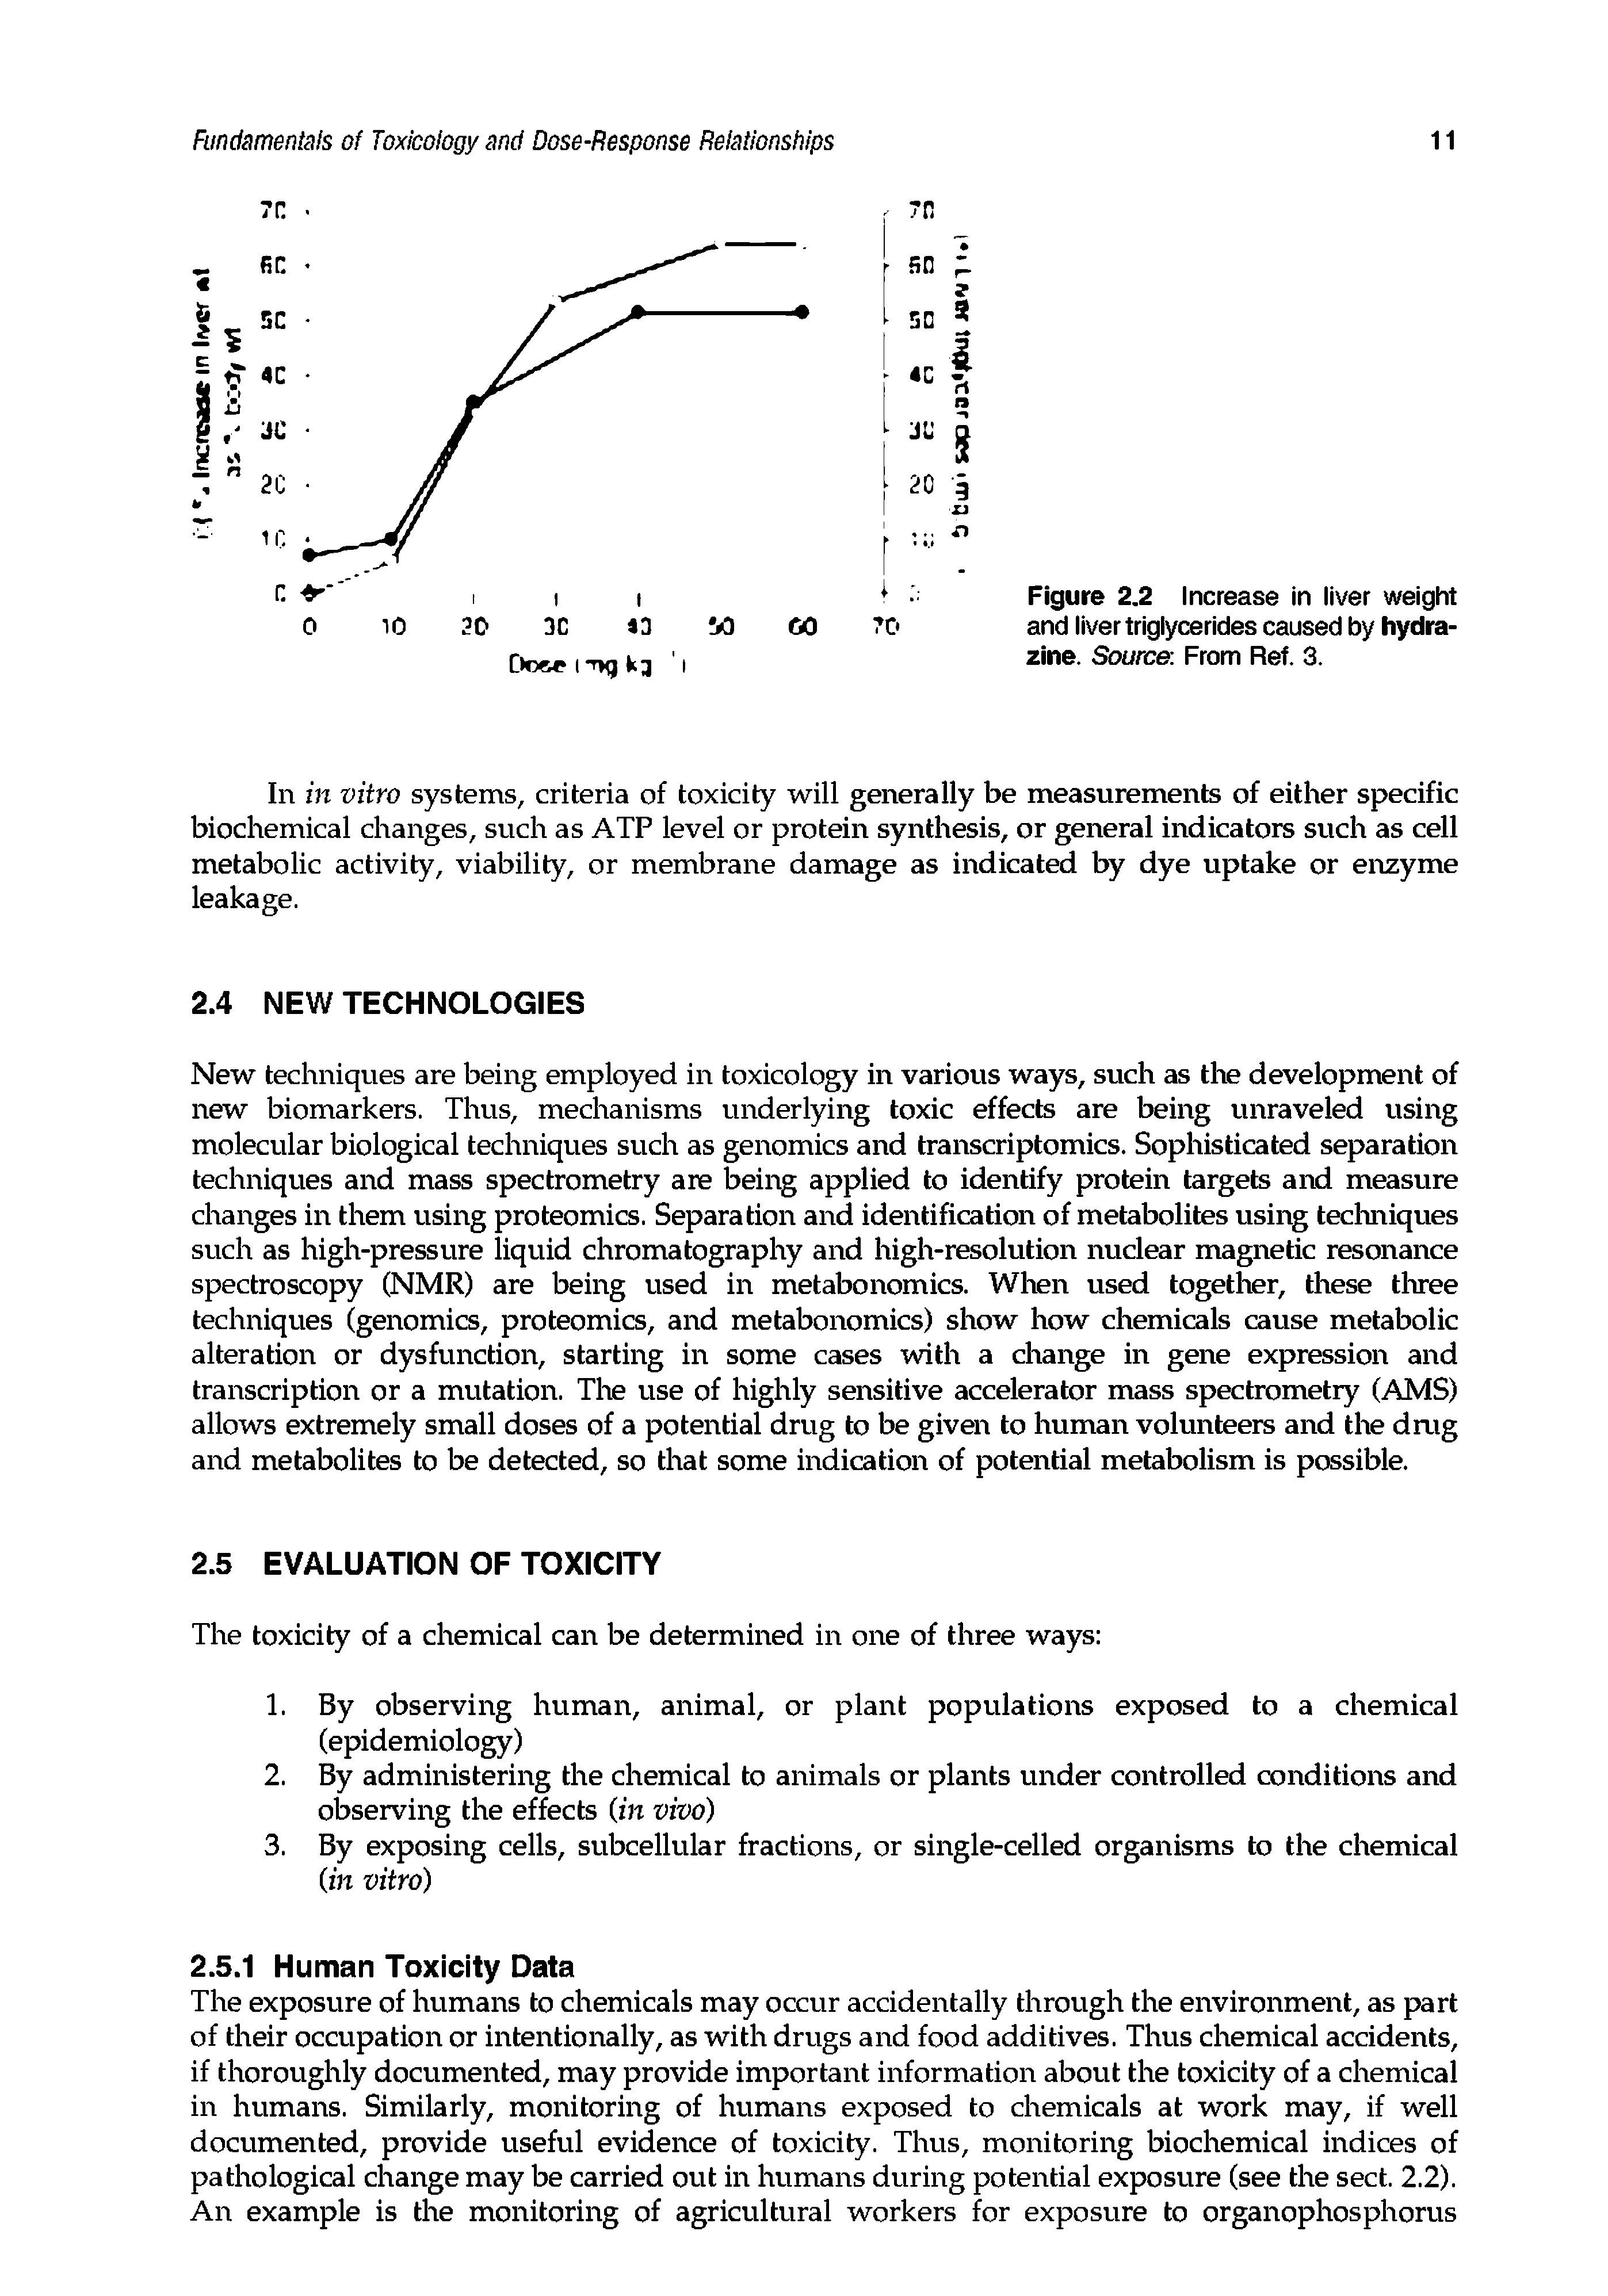 Figure 2.2 Increase in liver weight and liver triglycerides caused by hydrazine. Source. From Ref. 3.